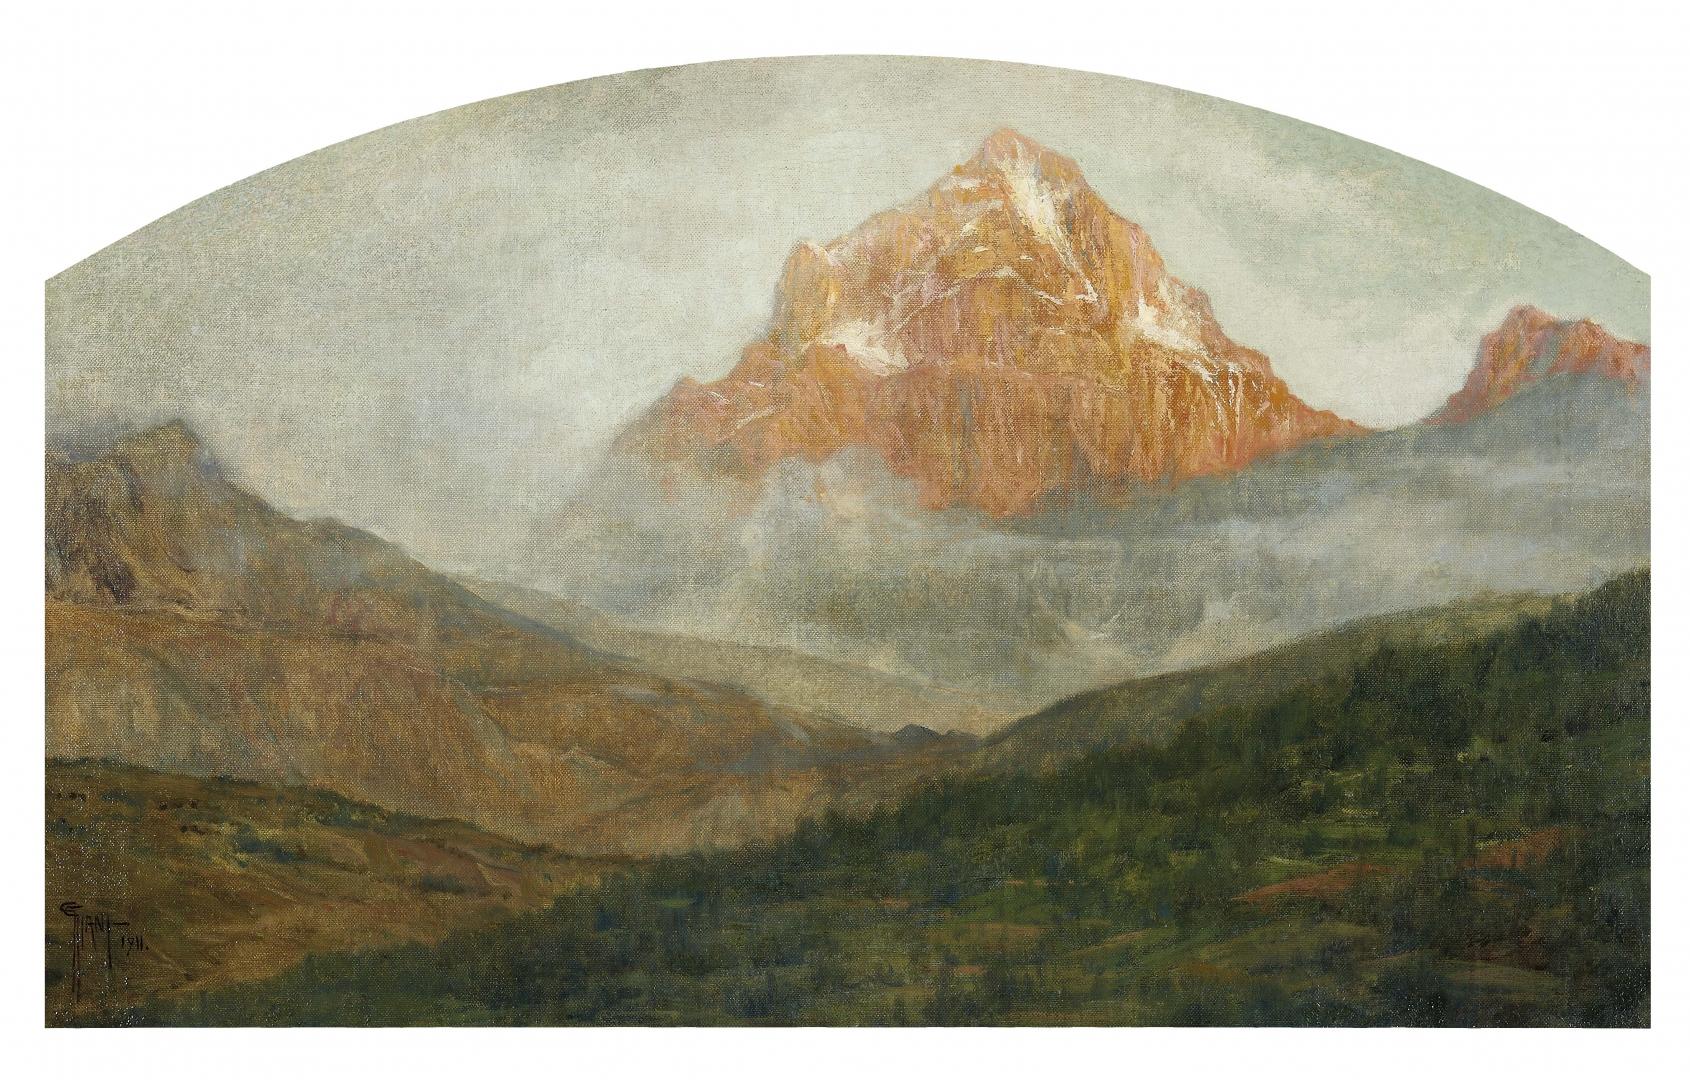 Mountain Landscape - Oil on Canvas by G. Giani - 1911